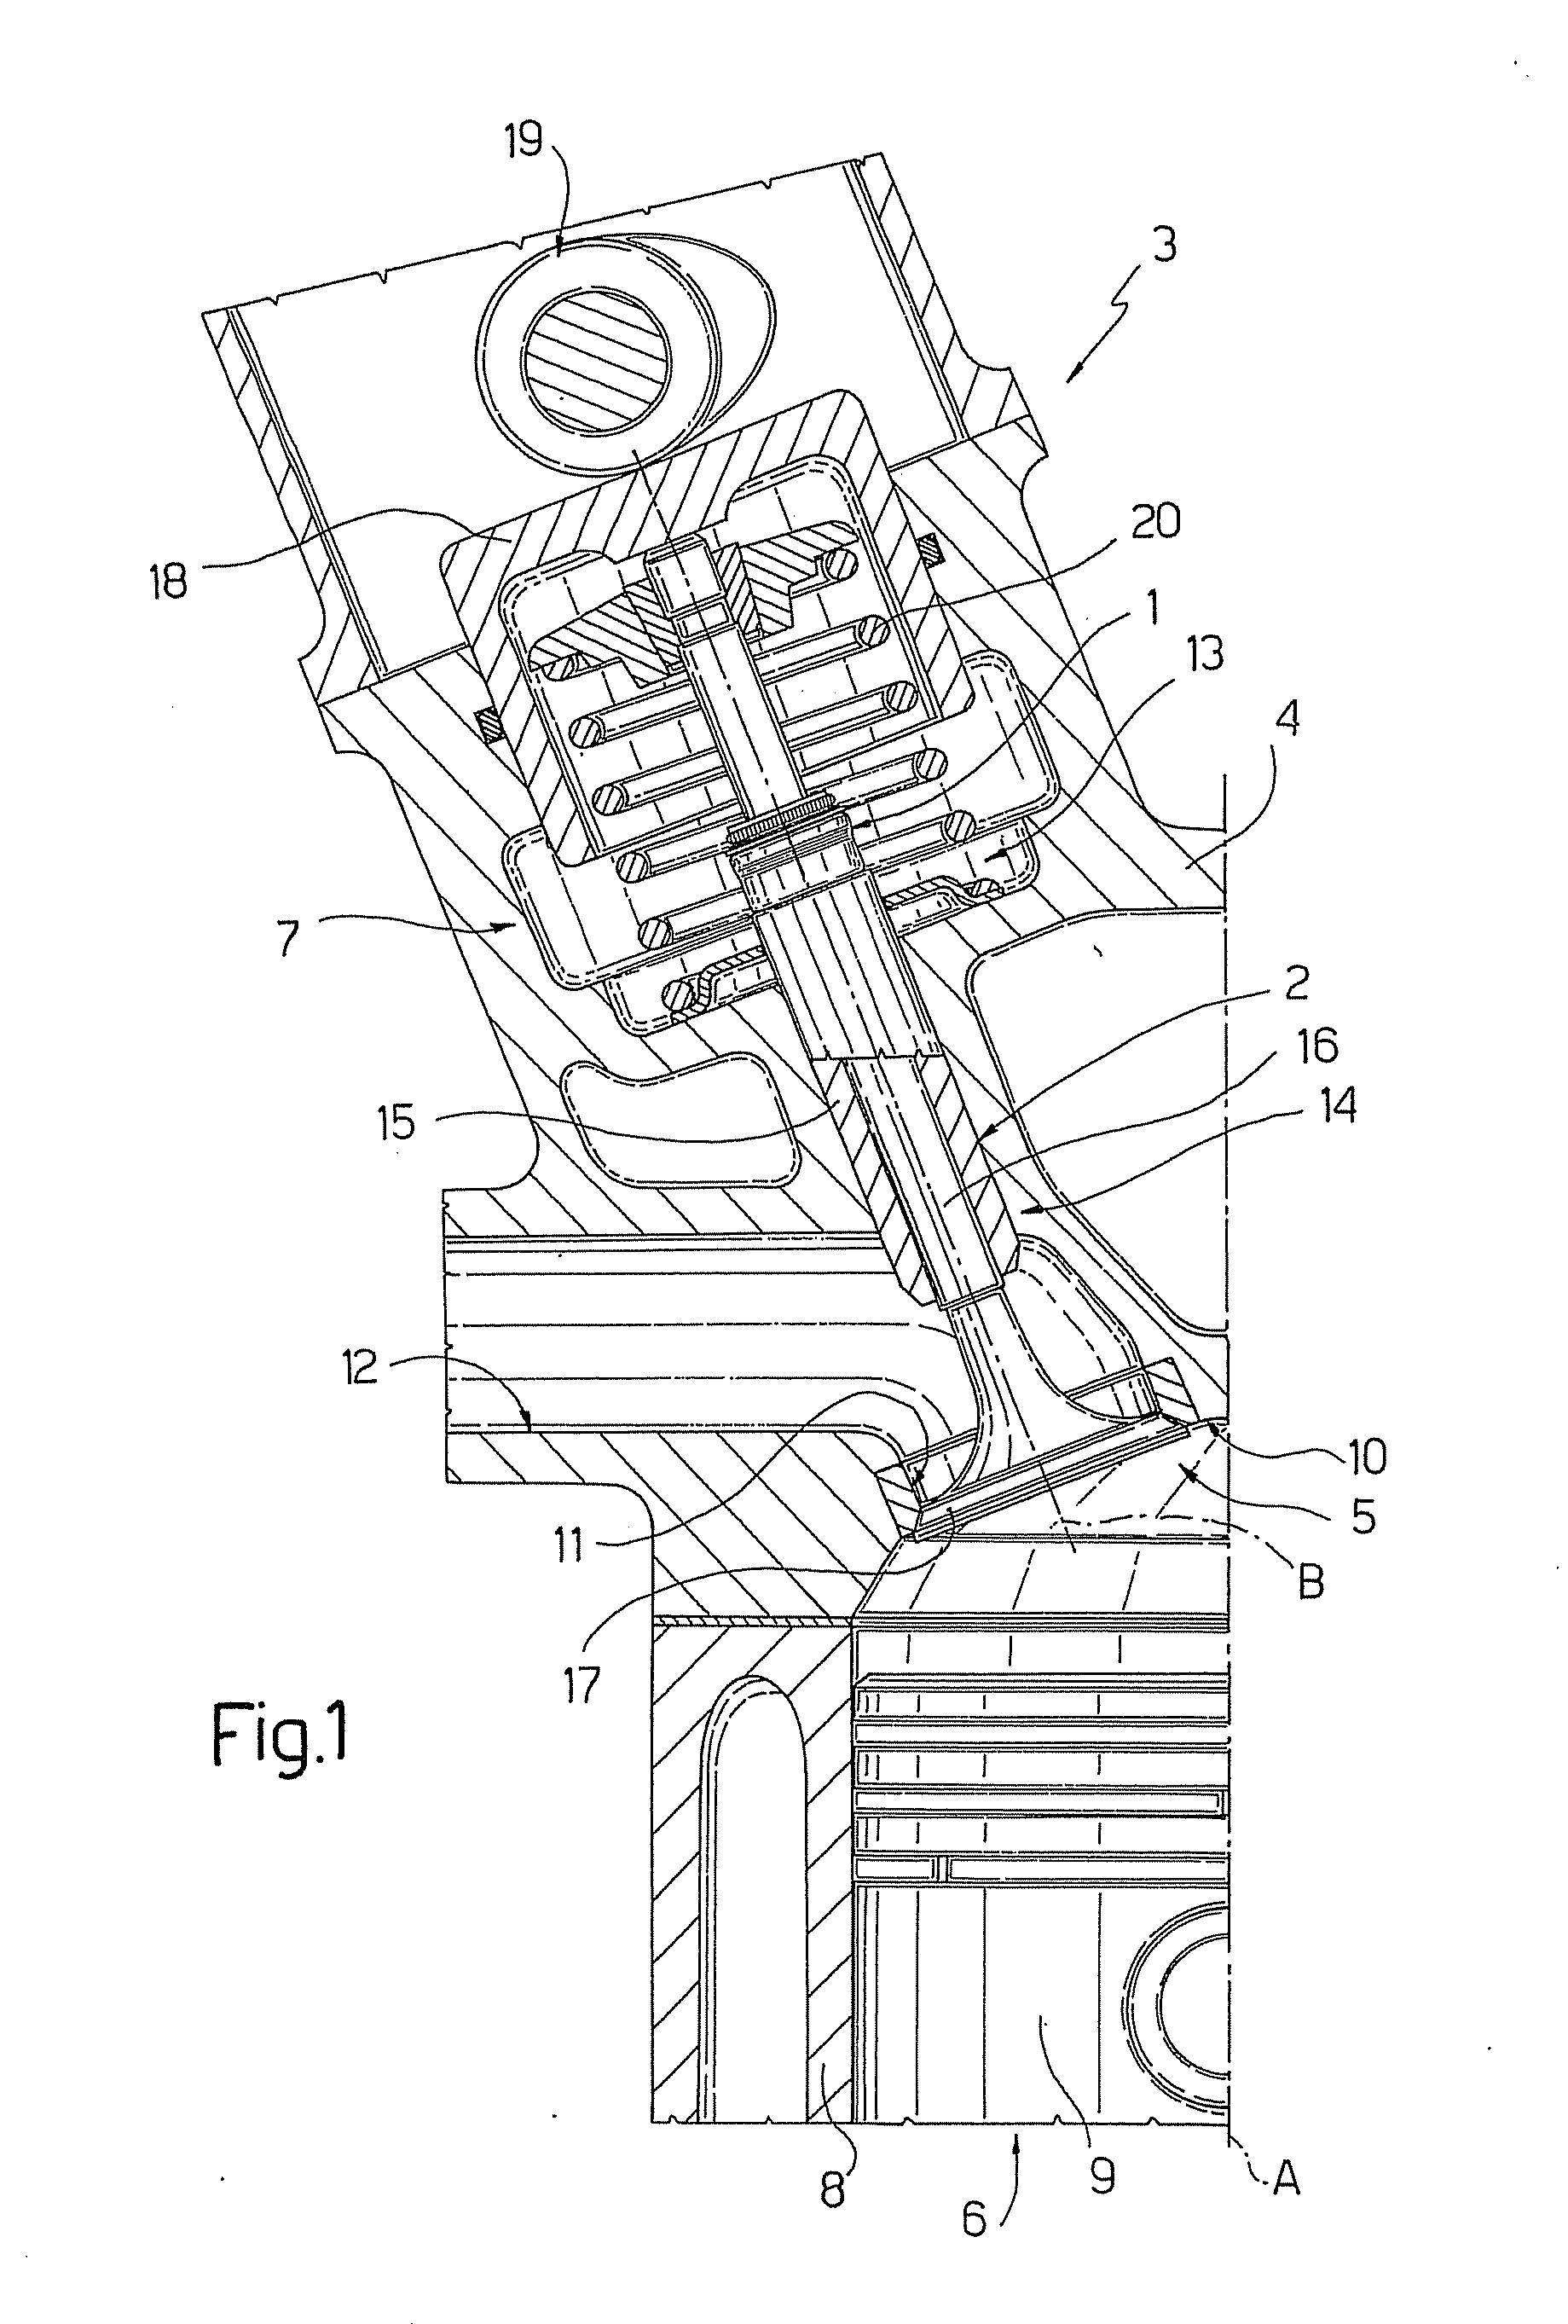 Gasket for a Valve in an Internal Combustion Engine